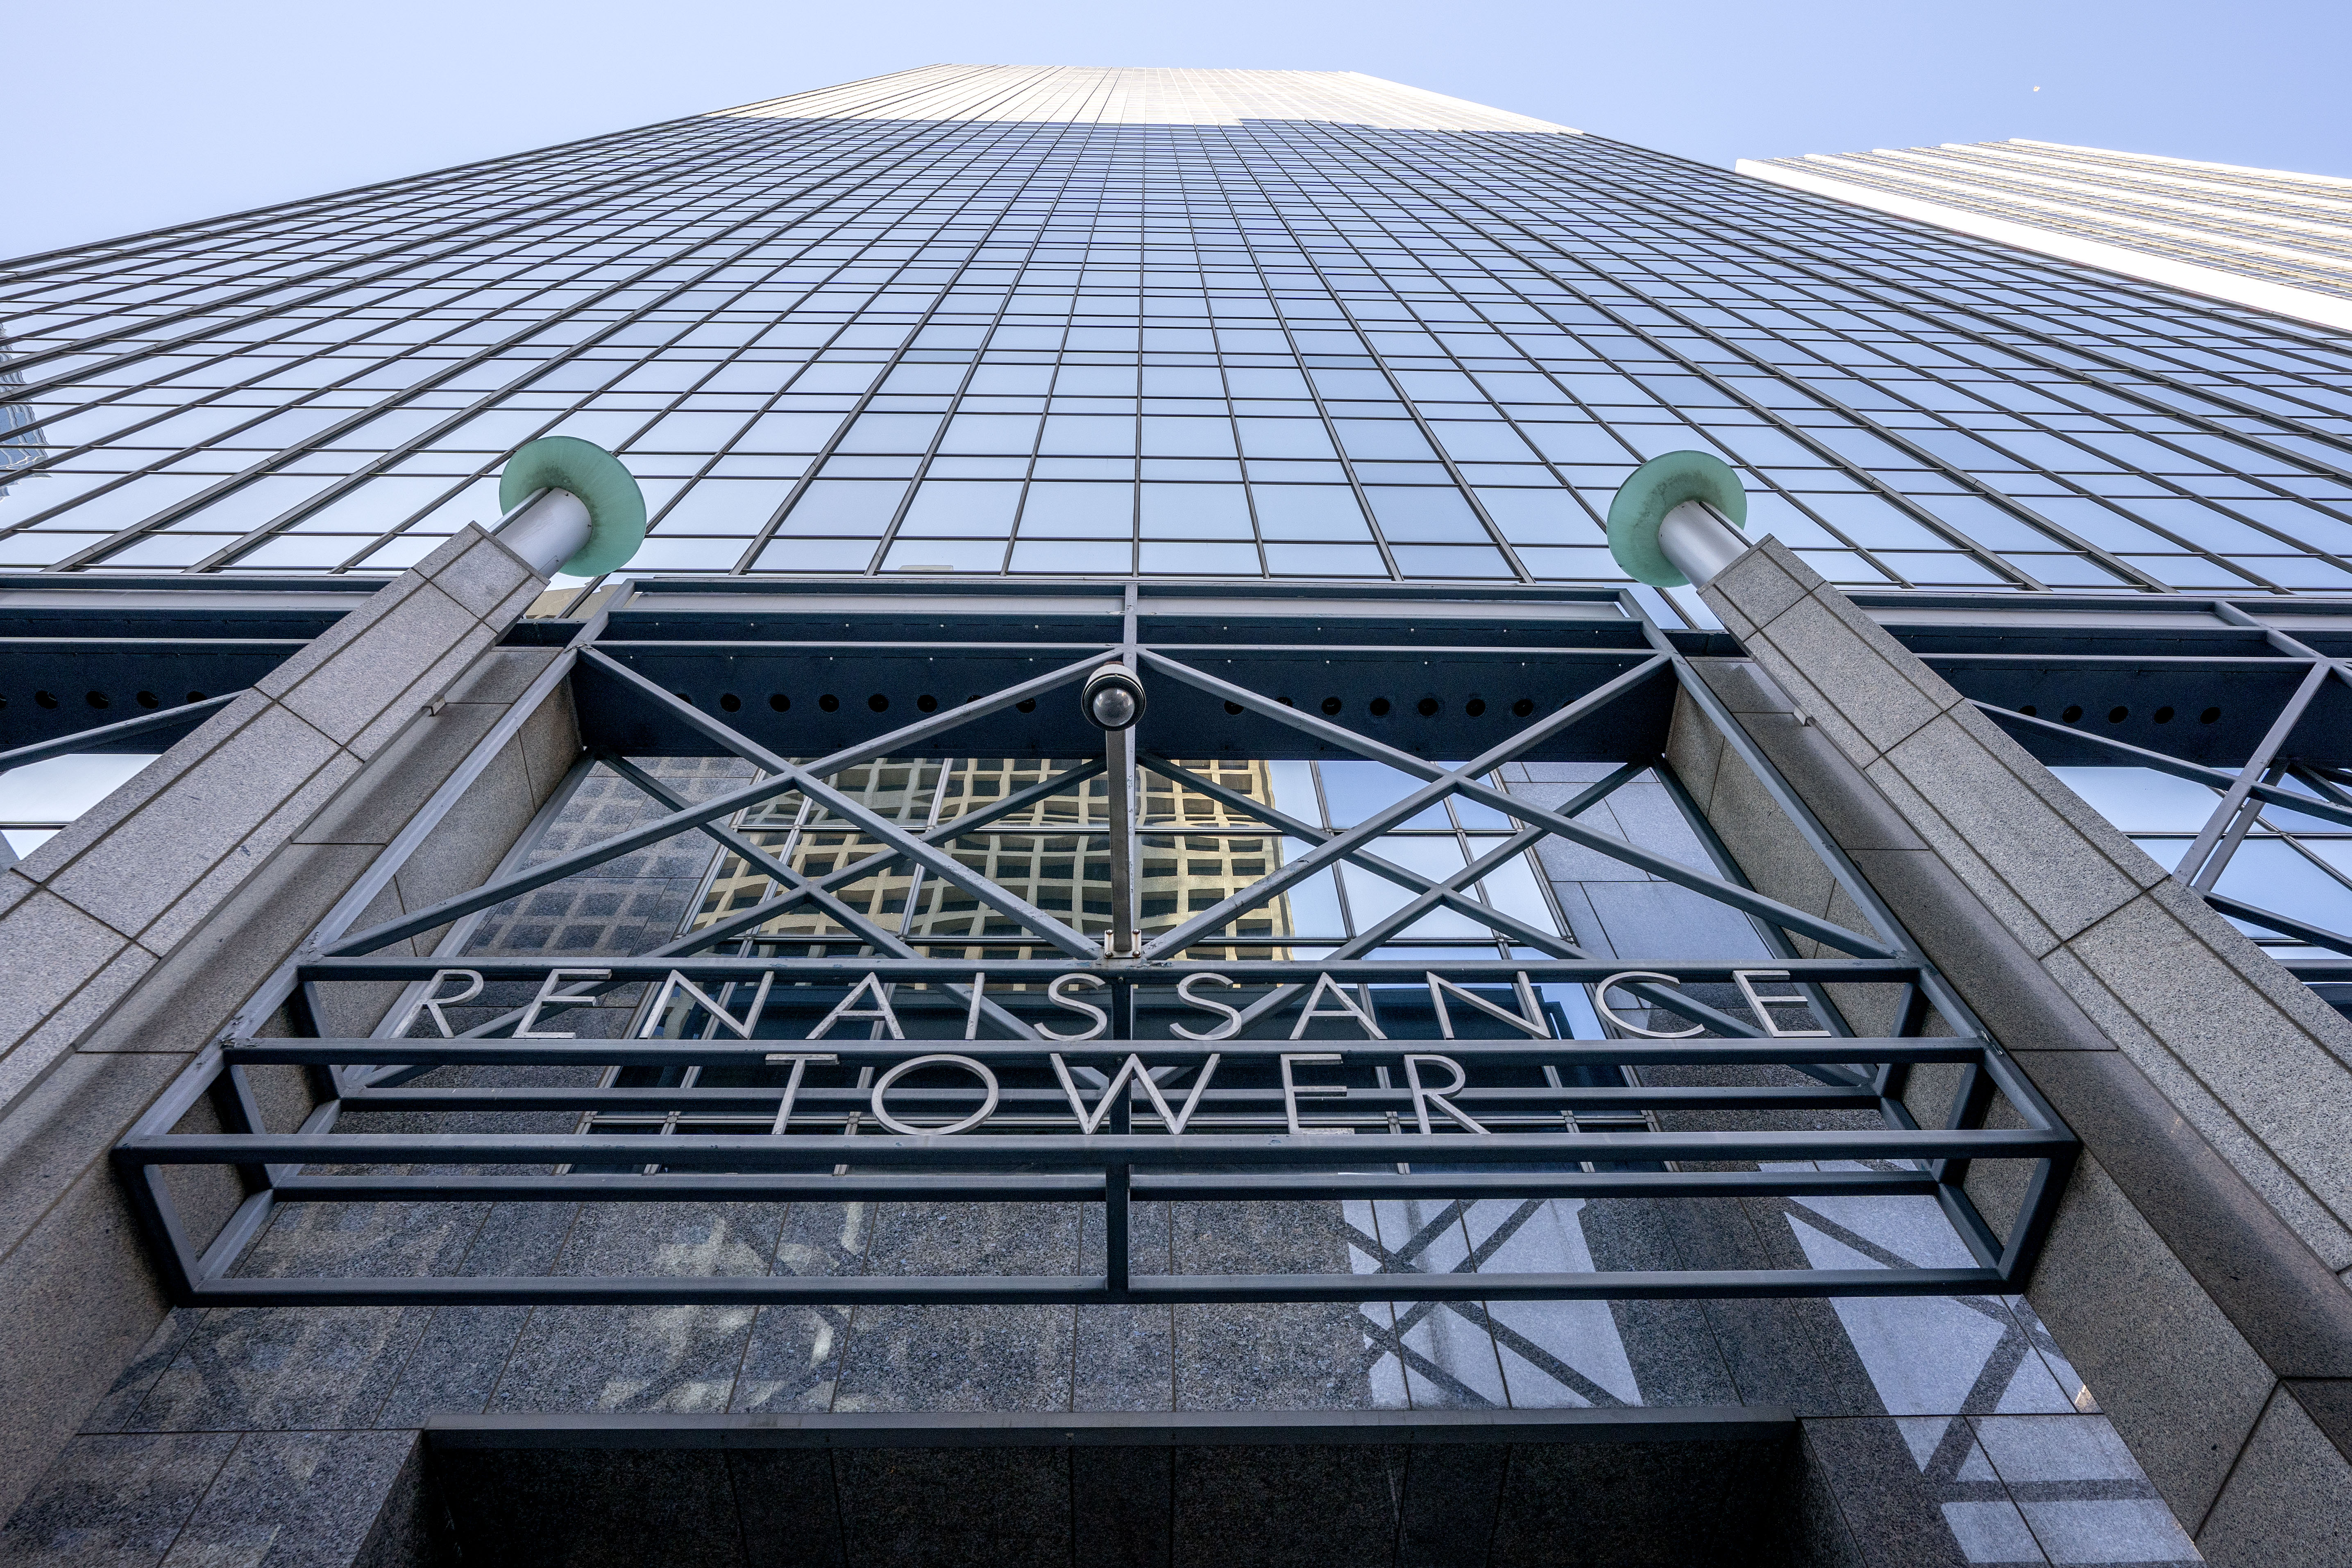 Towering office buildings and pricey residences: the